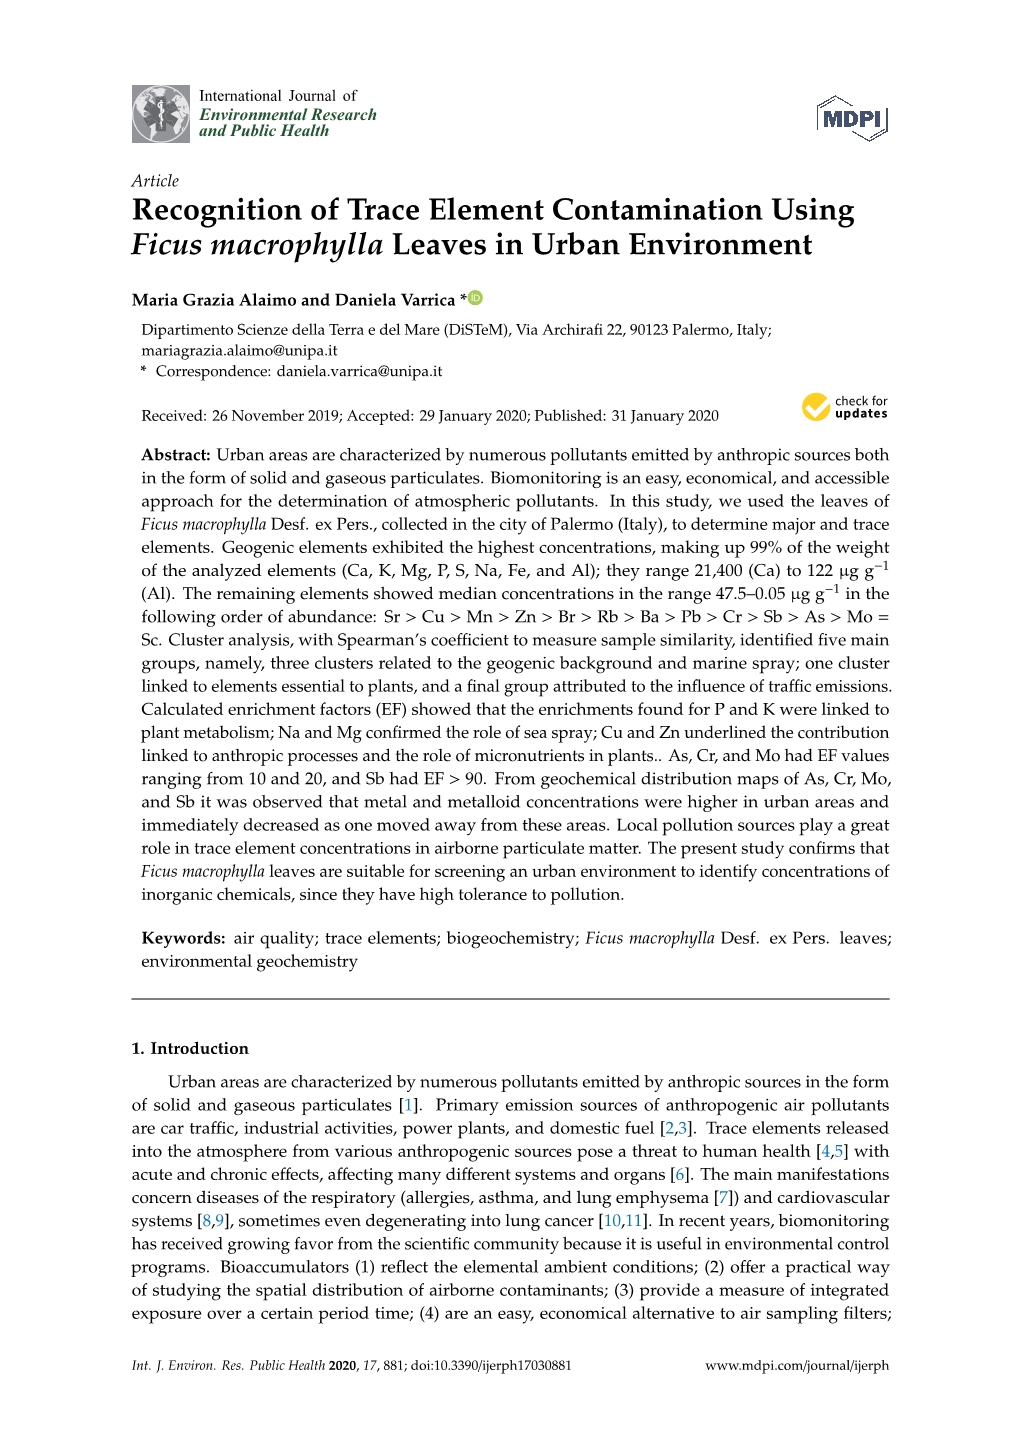 Recognition of Trace Element Contamination Using Ficus Macrophylla Leaves in Urban Environment